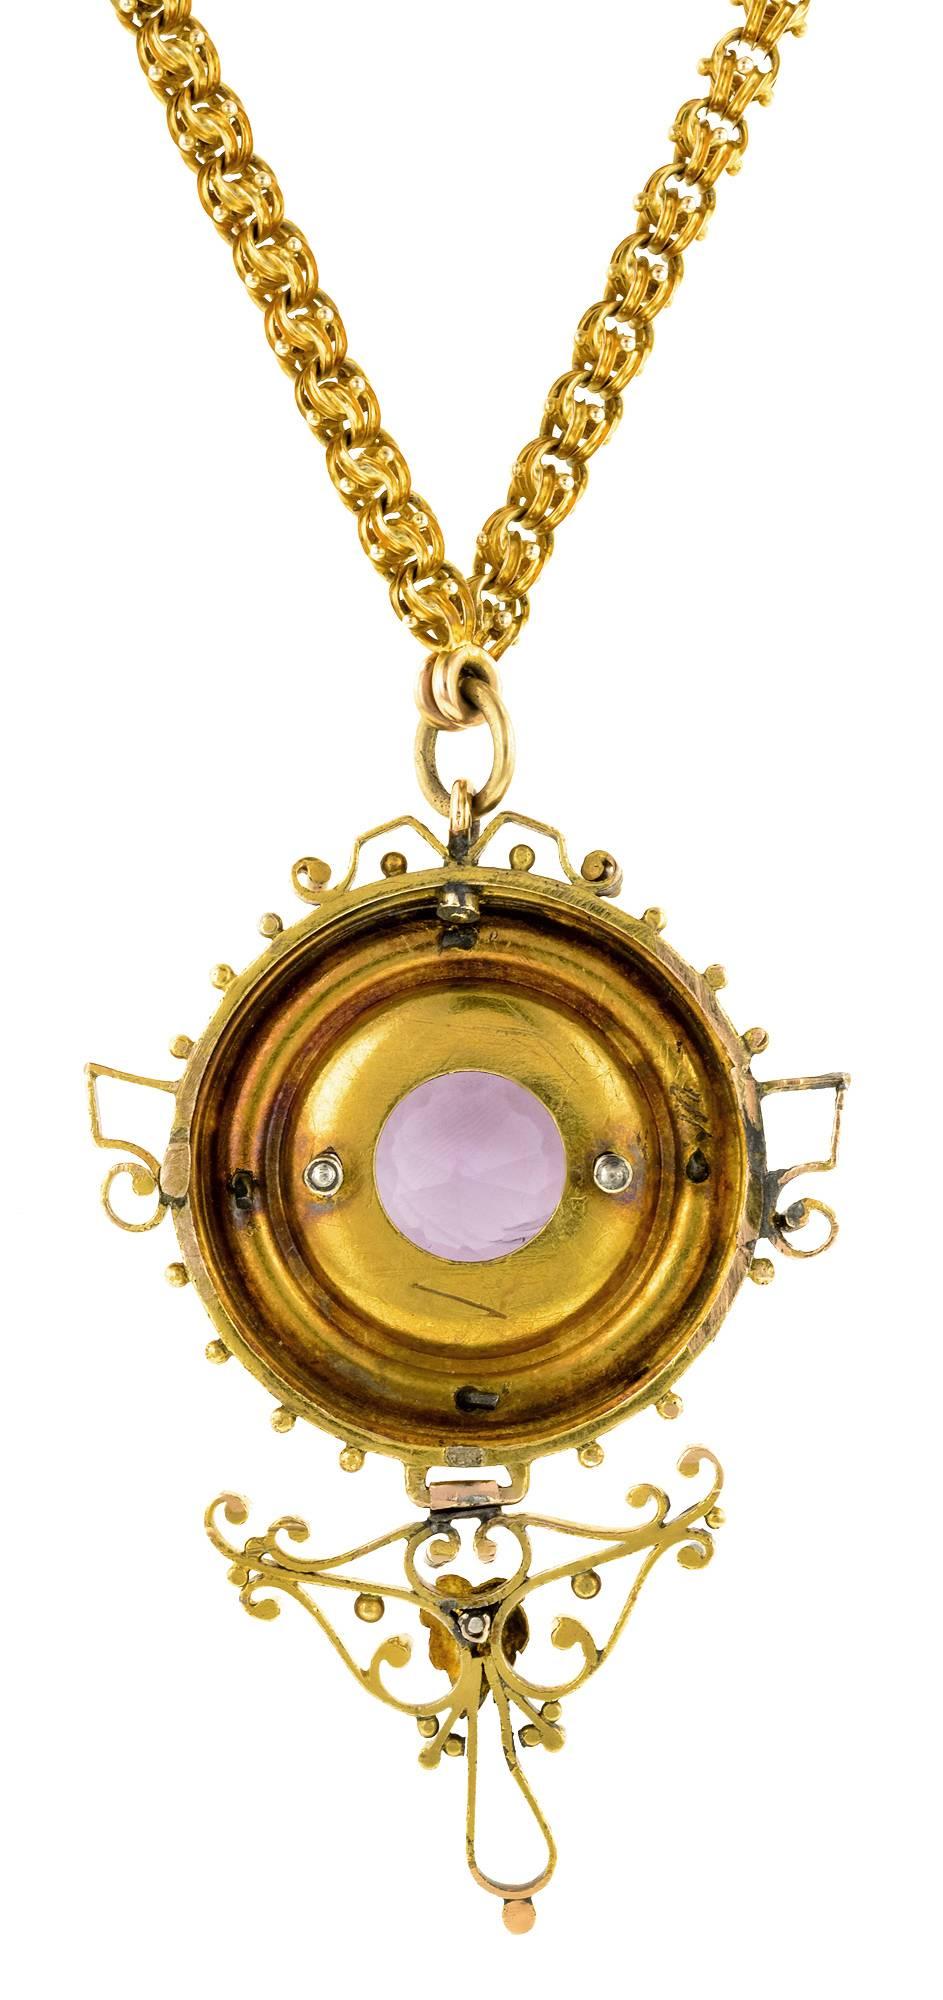 Victorian amethyst necklace centering a round amethyst measuring approx. 15.65mm, within a foliate motif frame in two tone gold.  The drop measuring approx. 2 3/16 x 1 7/16 inches (including bail), suspended from a fancy link chain measuring 20 1/4